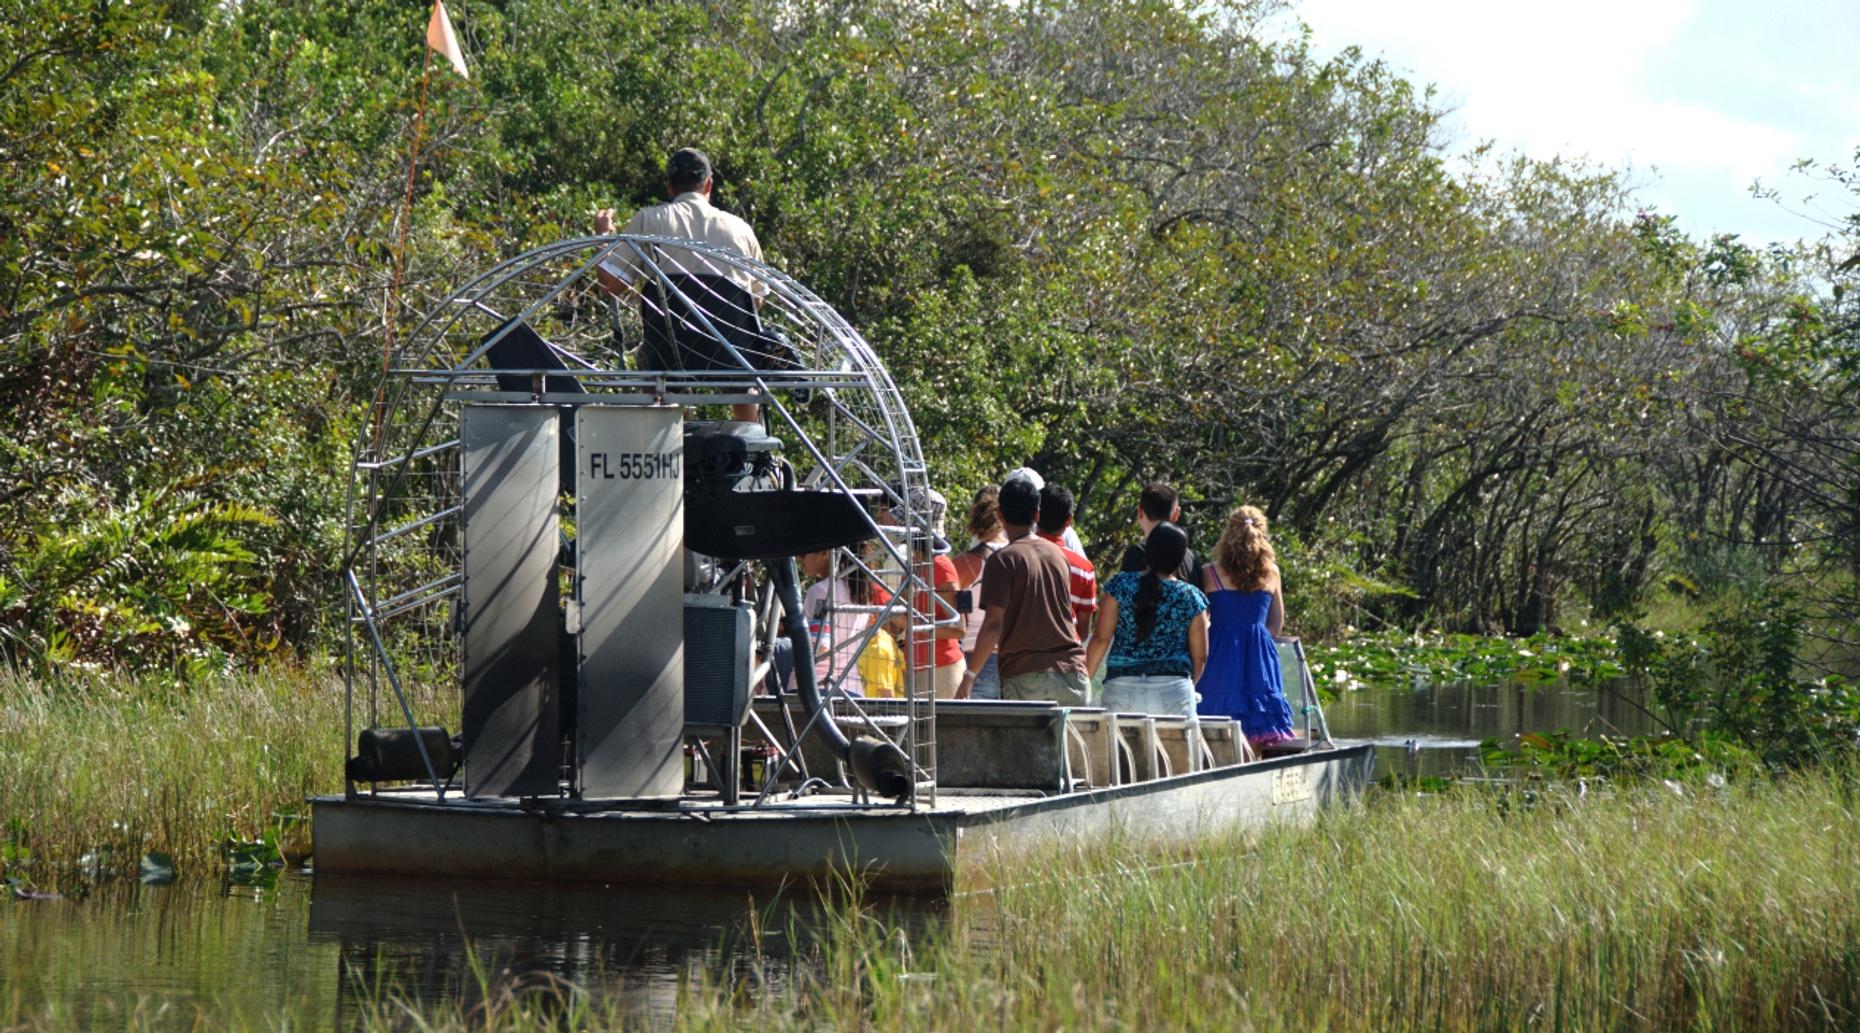 Airboat Ride in Orlando